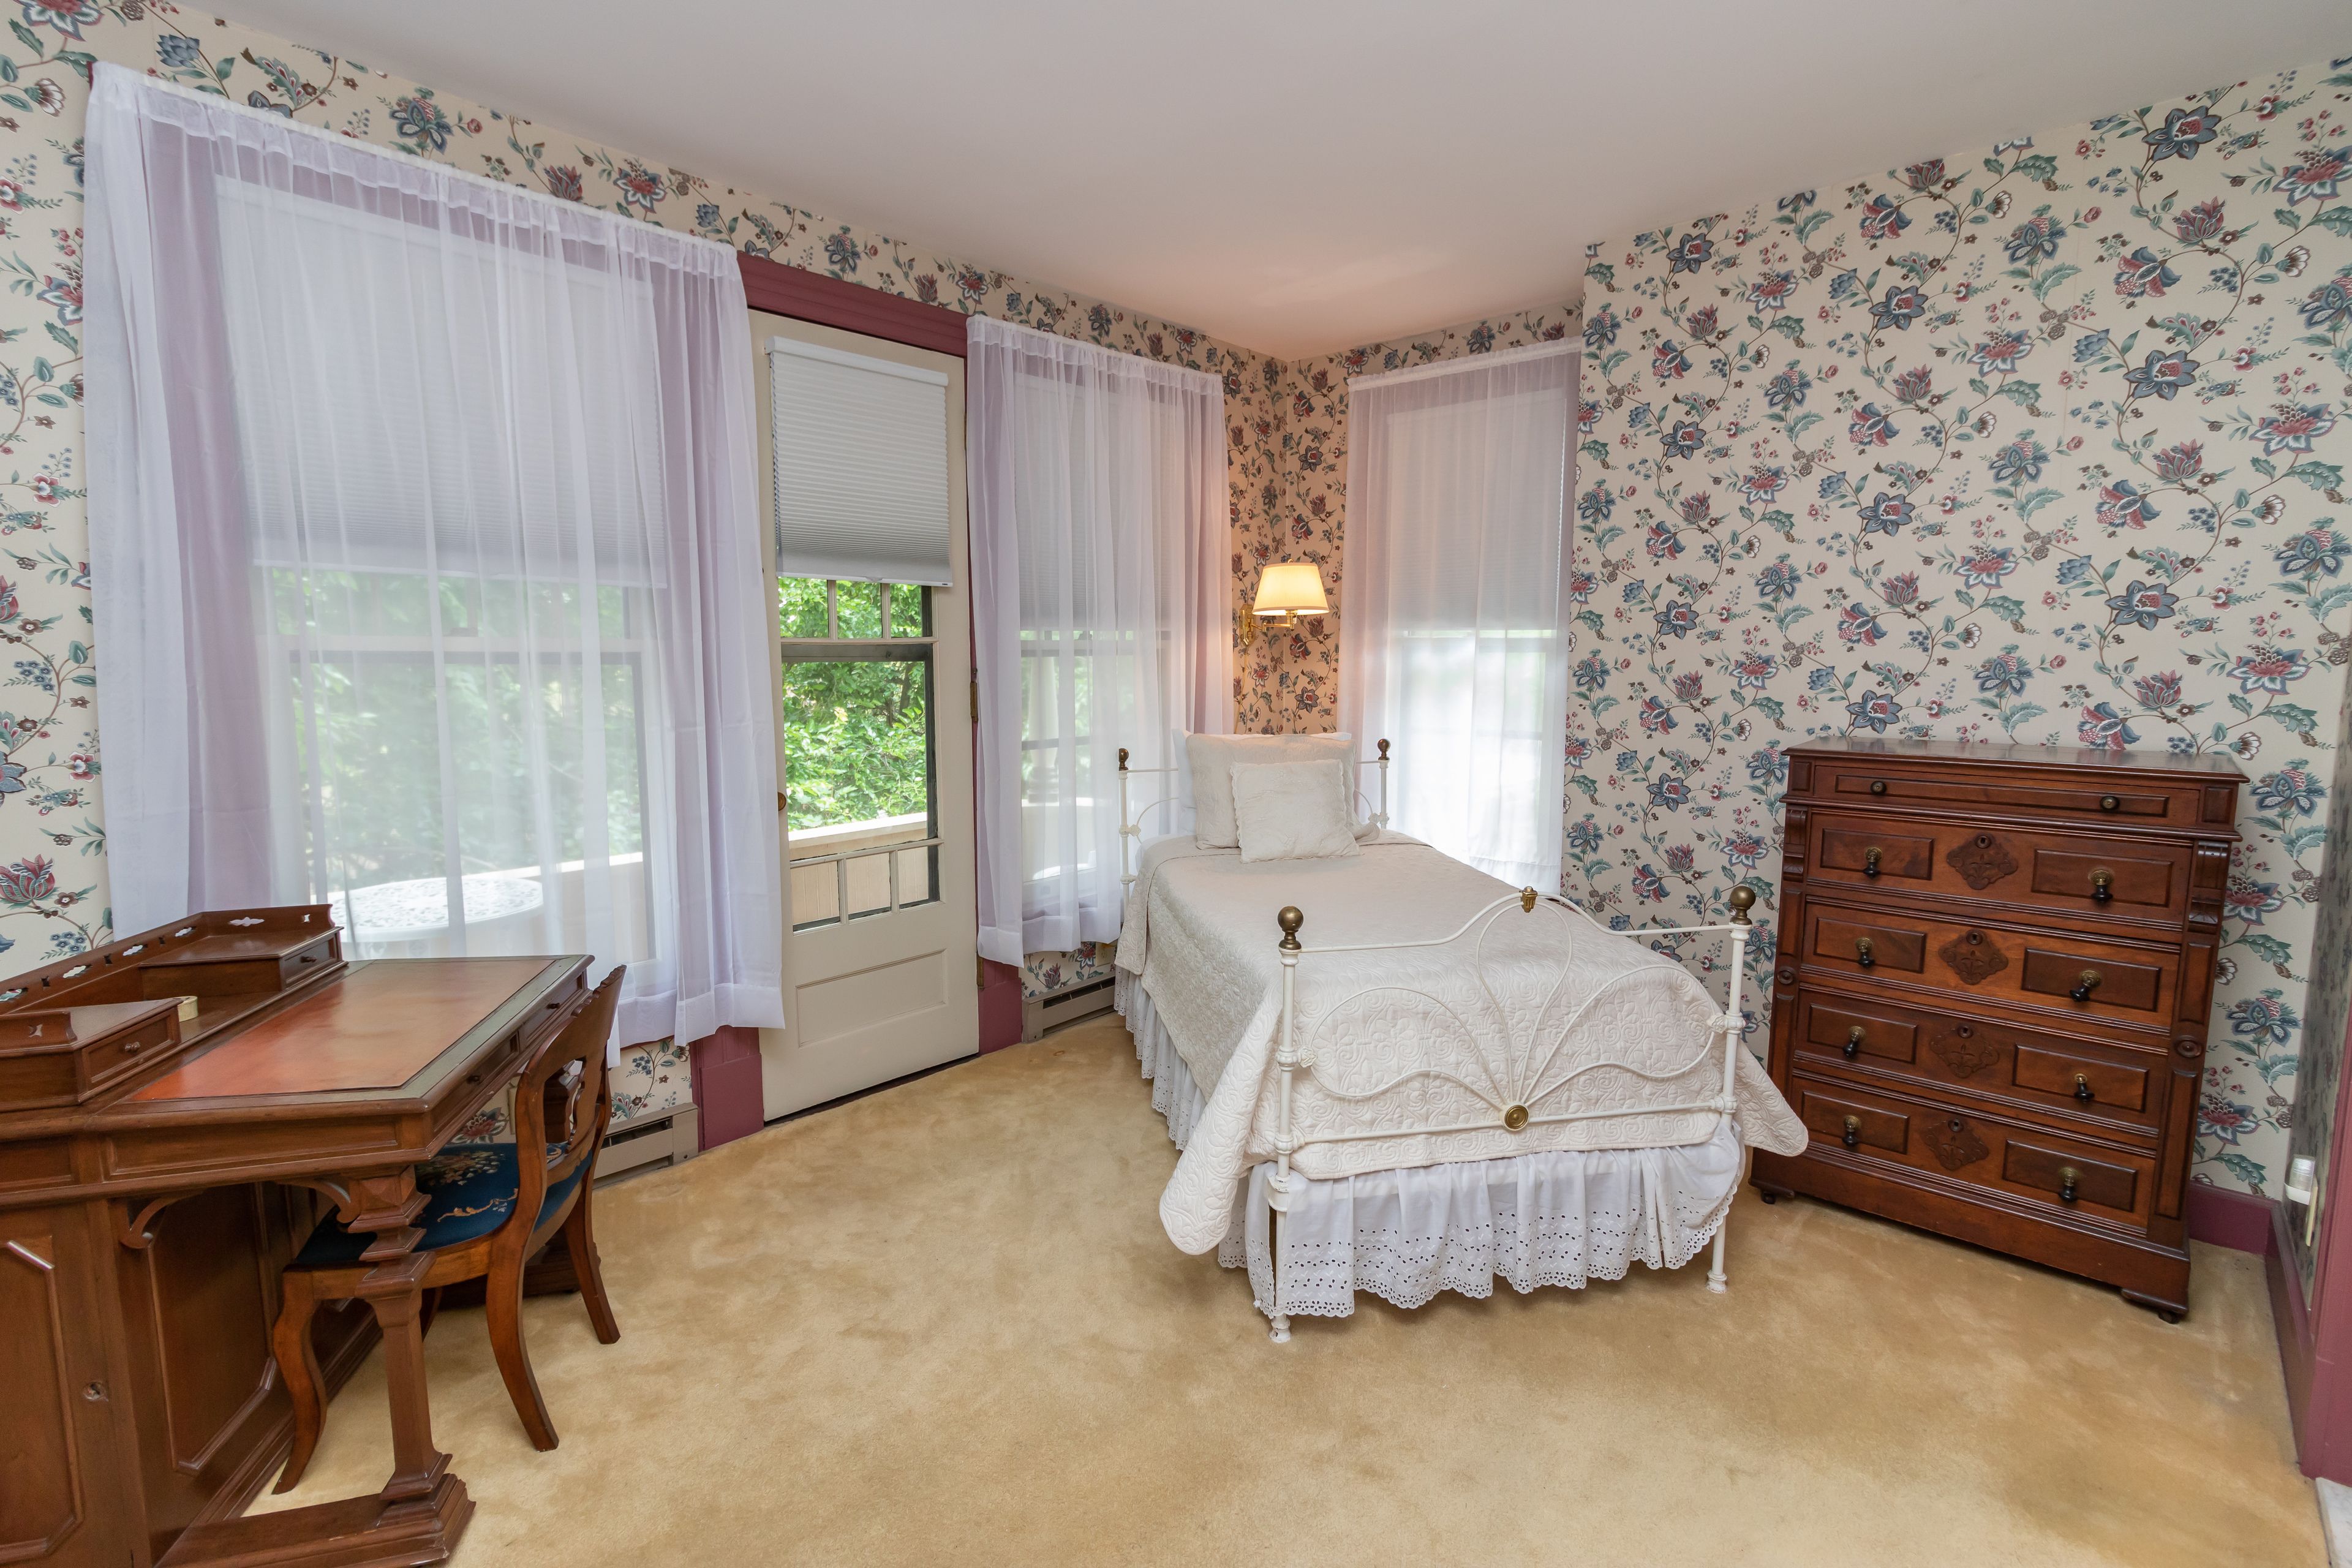 Saratoga Dreams Bed and Breakfast